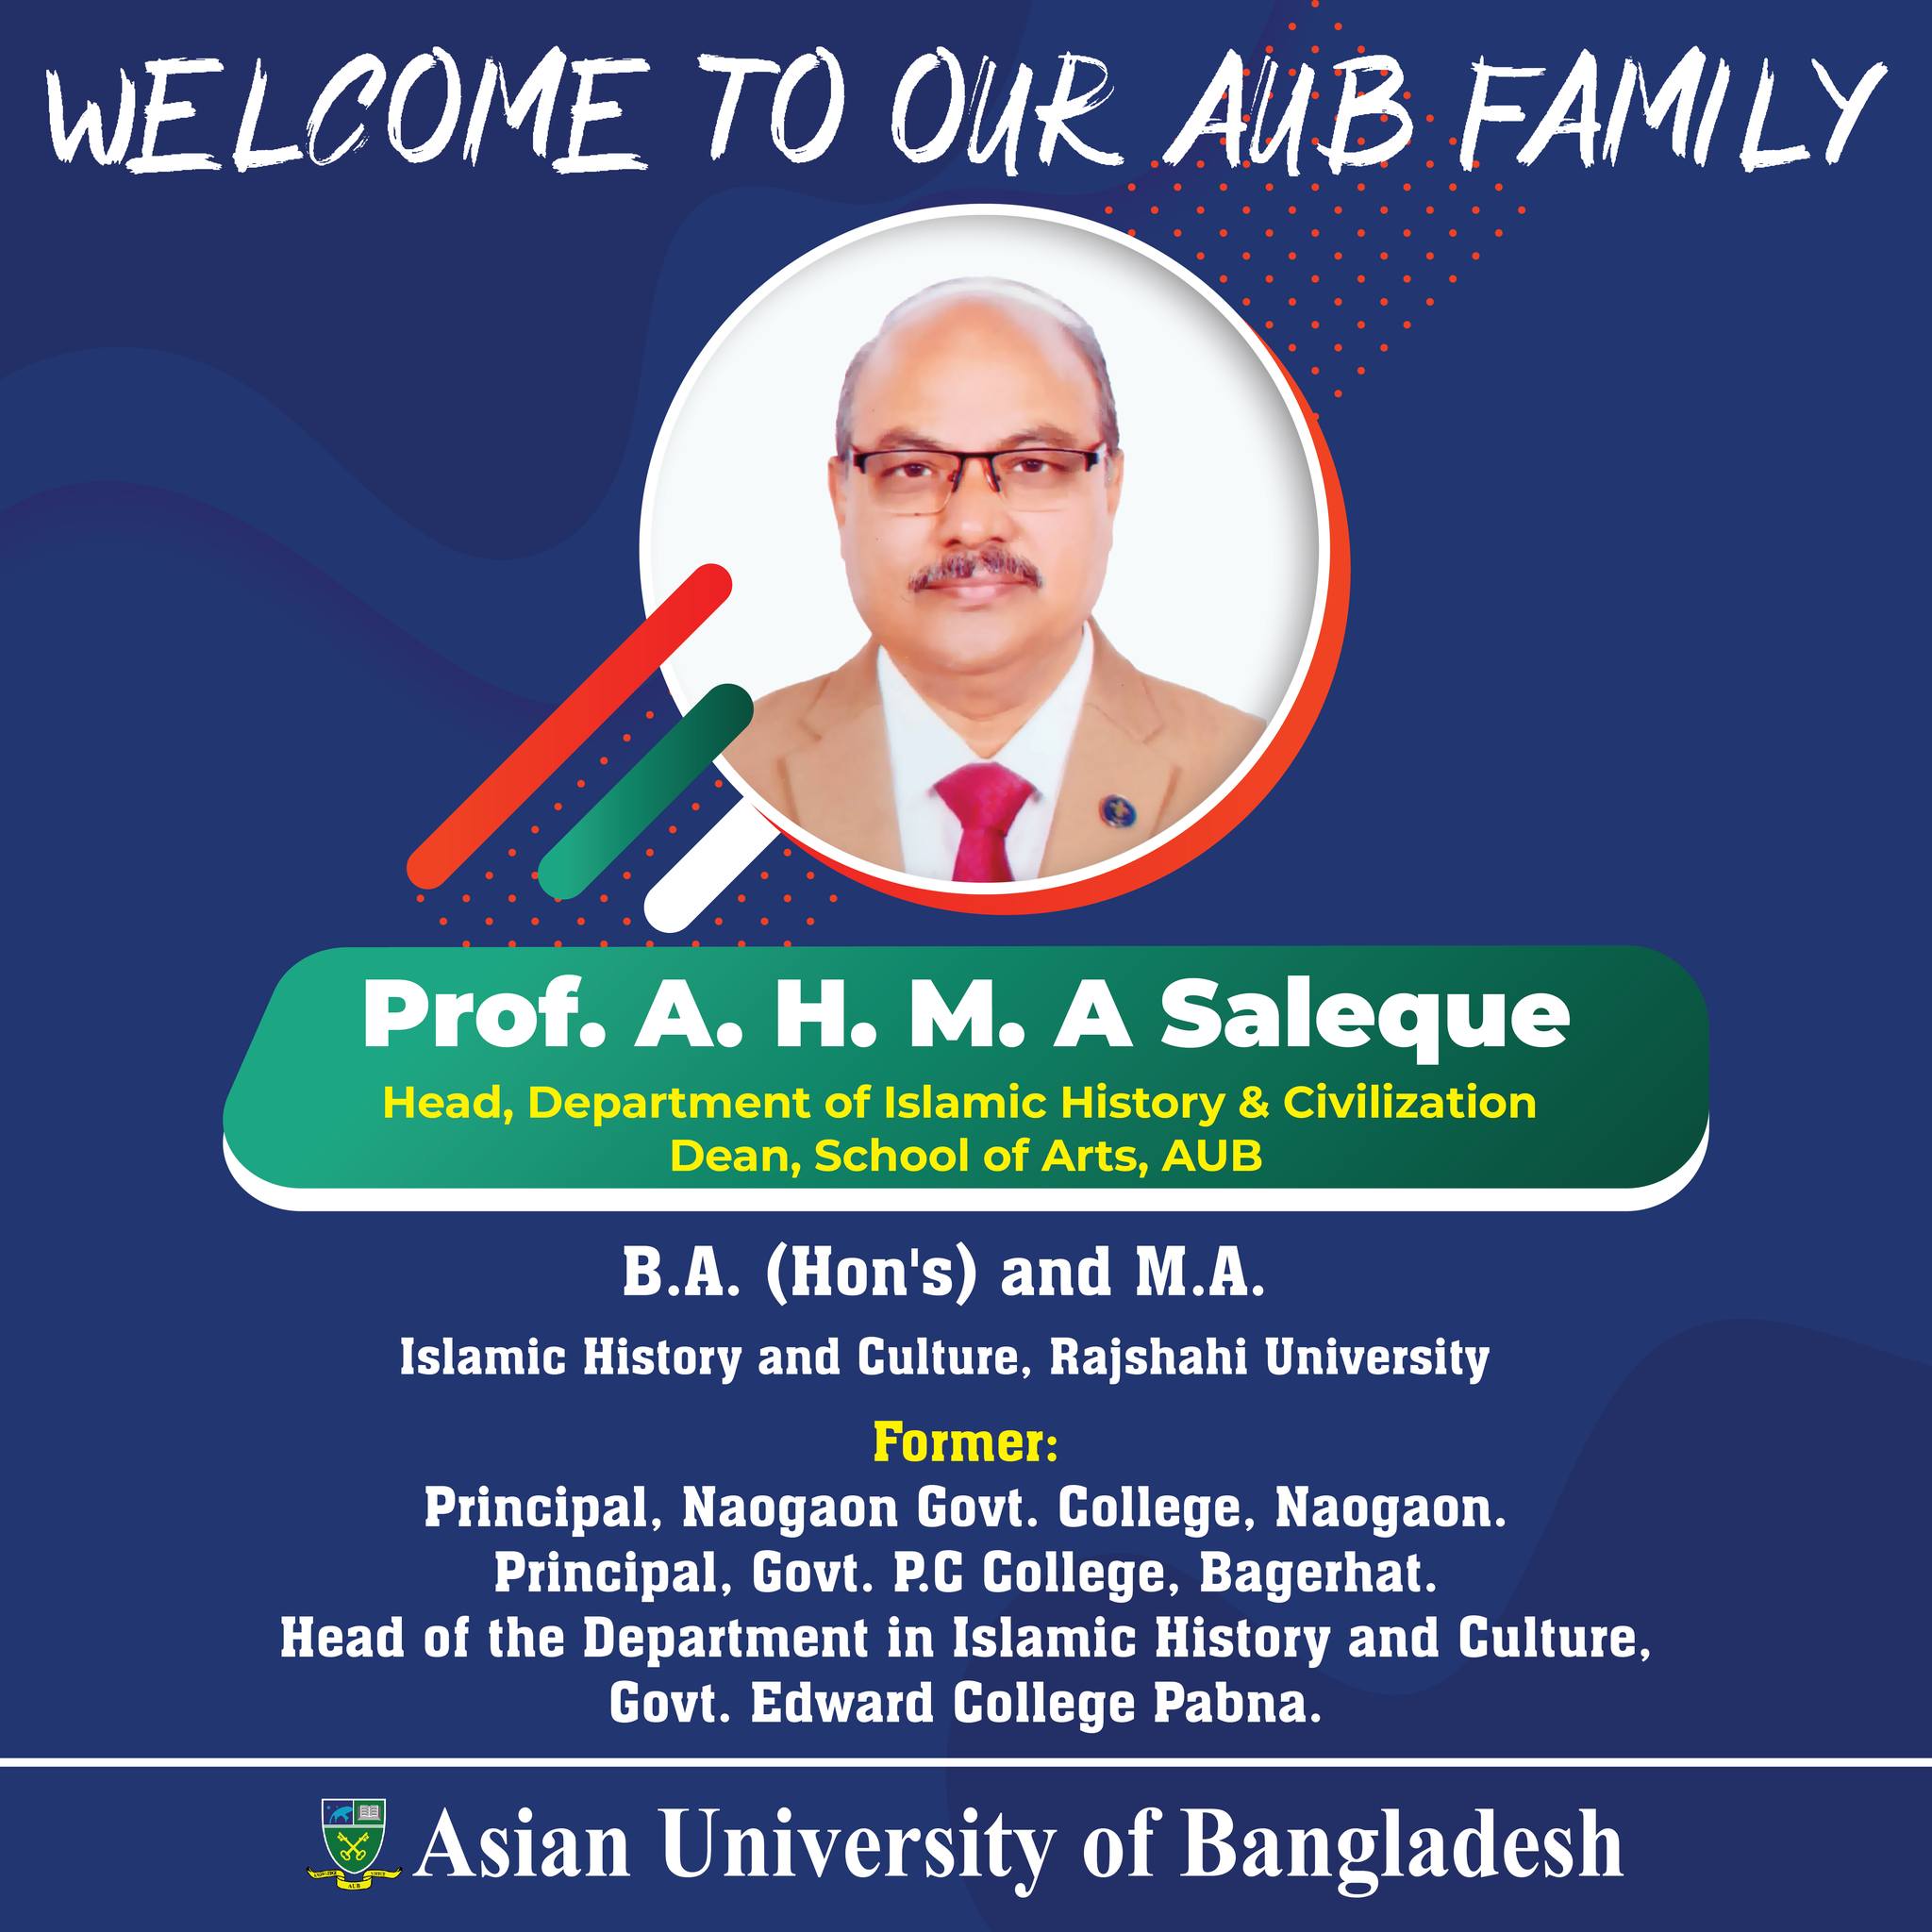 Welcome to our AUB family image